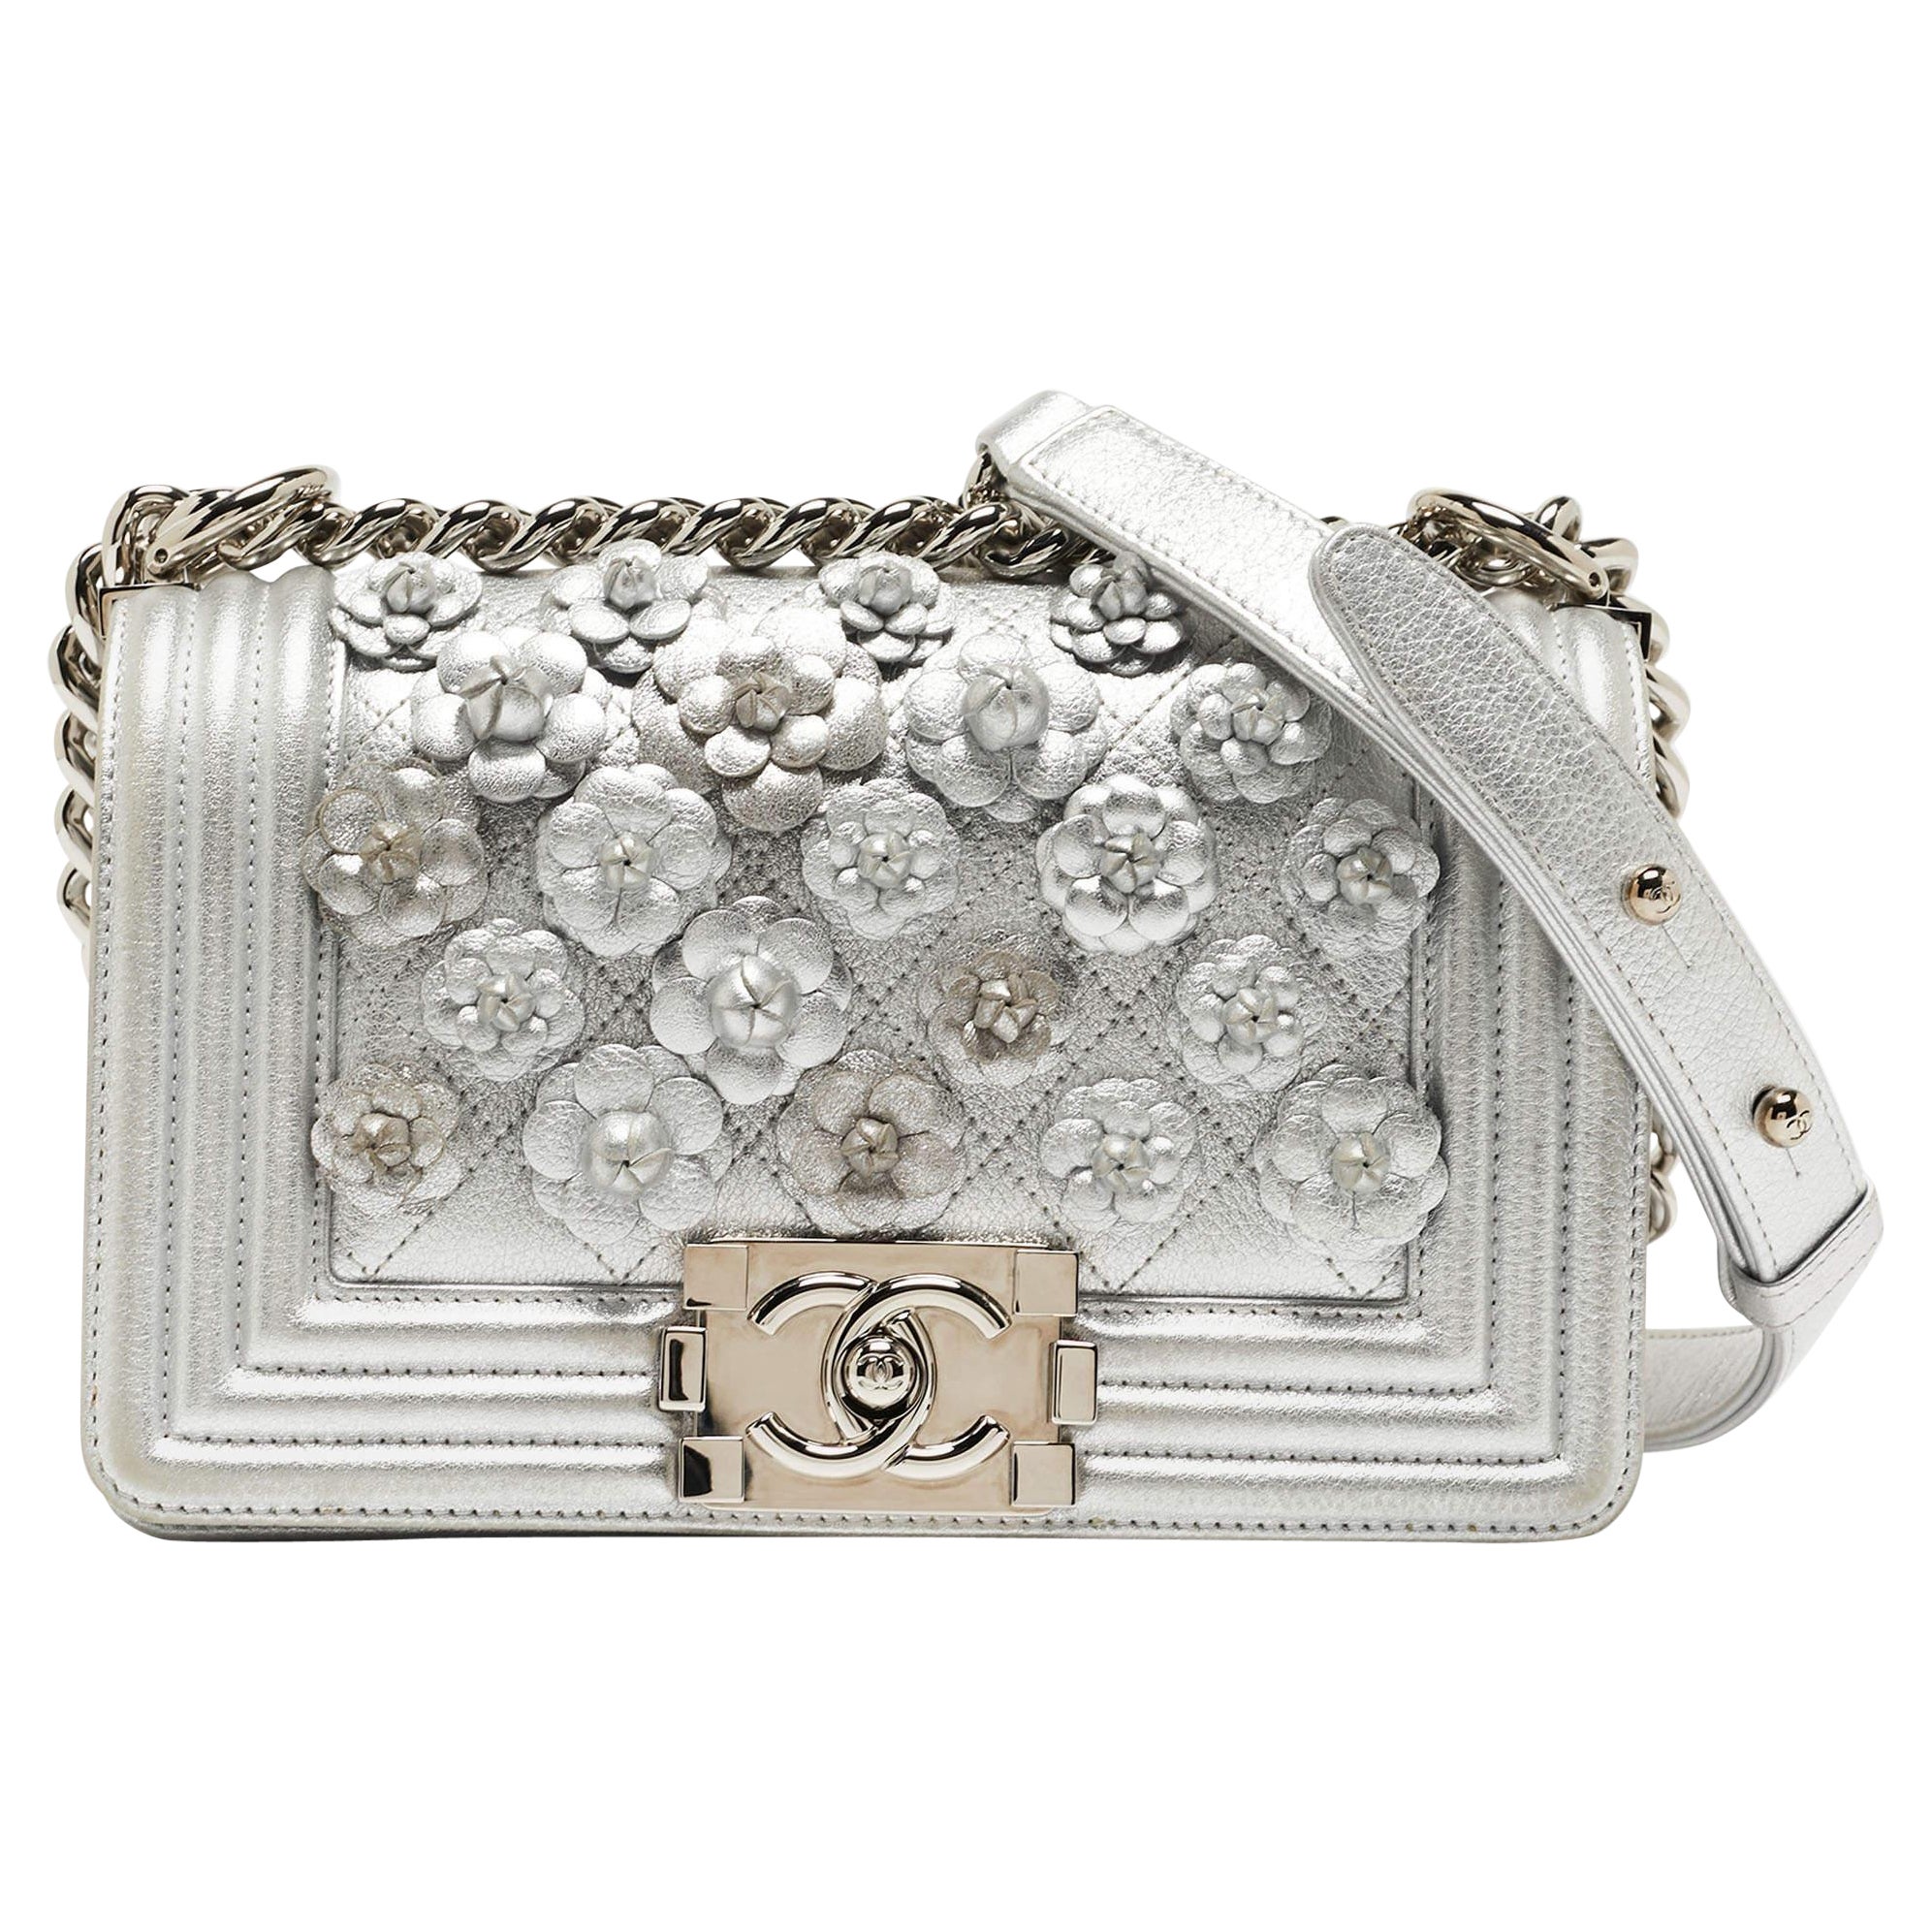 Chanel Silver Quilted Leather Small Camellia Applique Boy Flap Bag For Sale